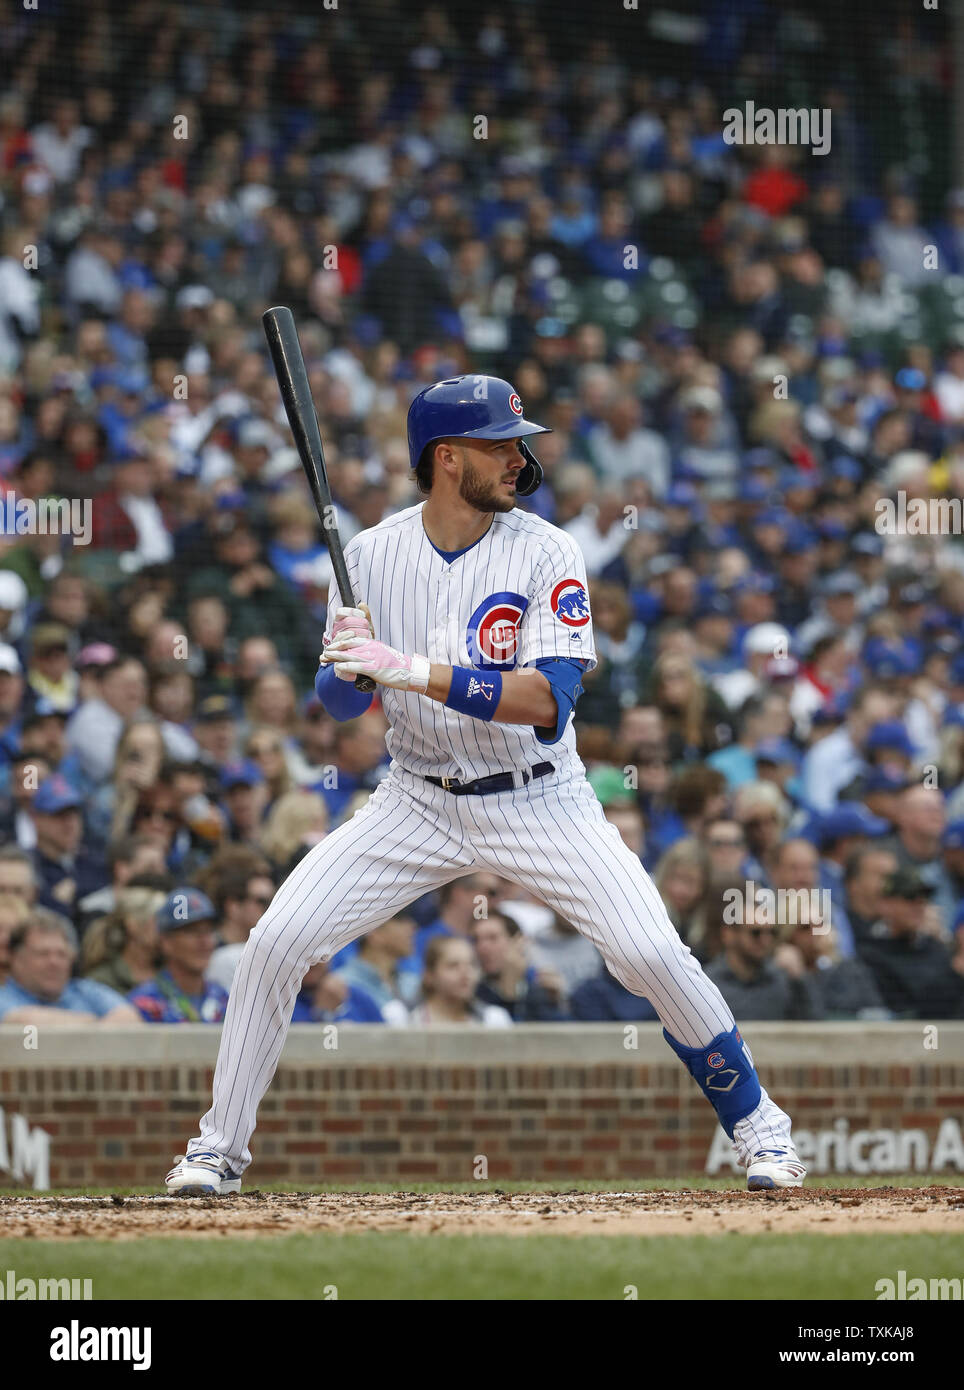 Chicago Cubs' Kris Bryant bats against the Cincinnati Reds in the third inning at Wrigley Field on May 24, 2019 in Chicago. Photo by Kamil Krzaczynski/UPI Stock Photo